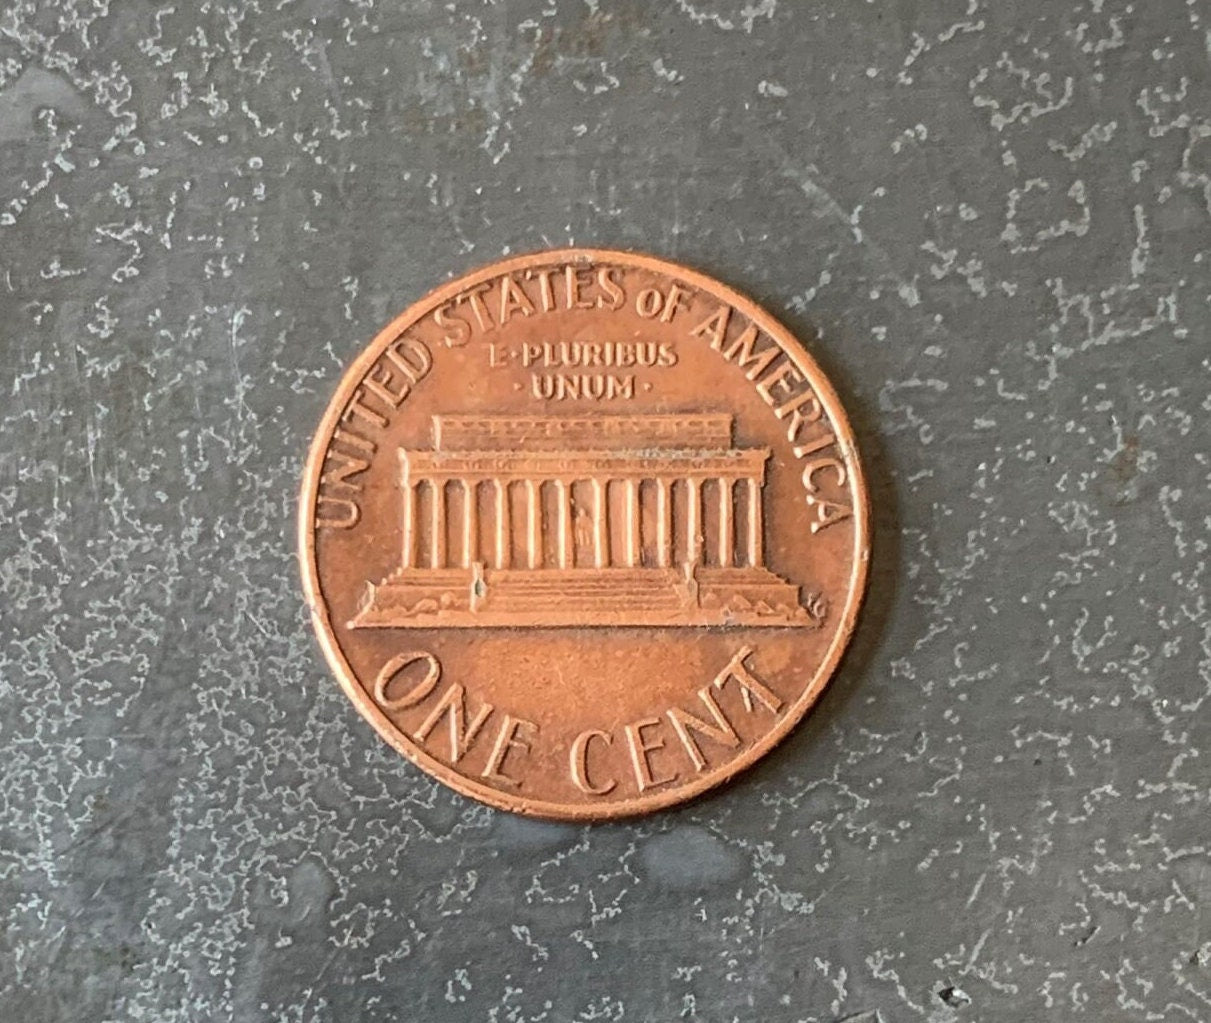 1983 D Lincoln Memorial Penny Cent - Fantastic Condition - 39th Anniversary - Collectible Coin - Denver Mint